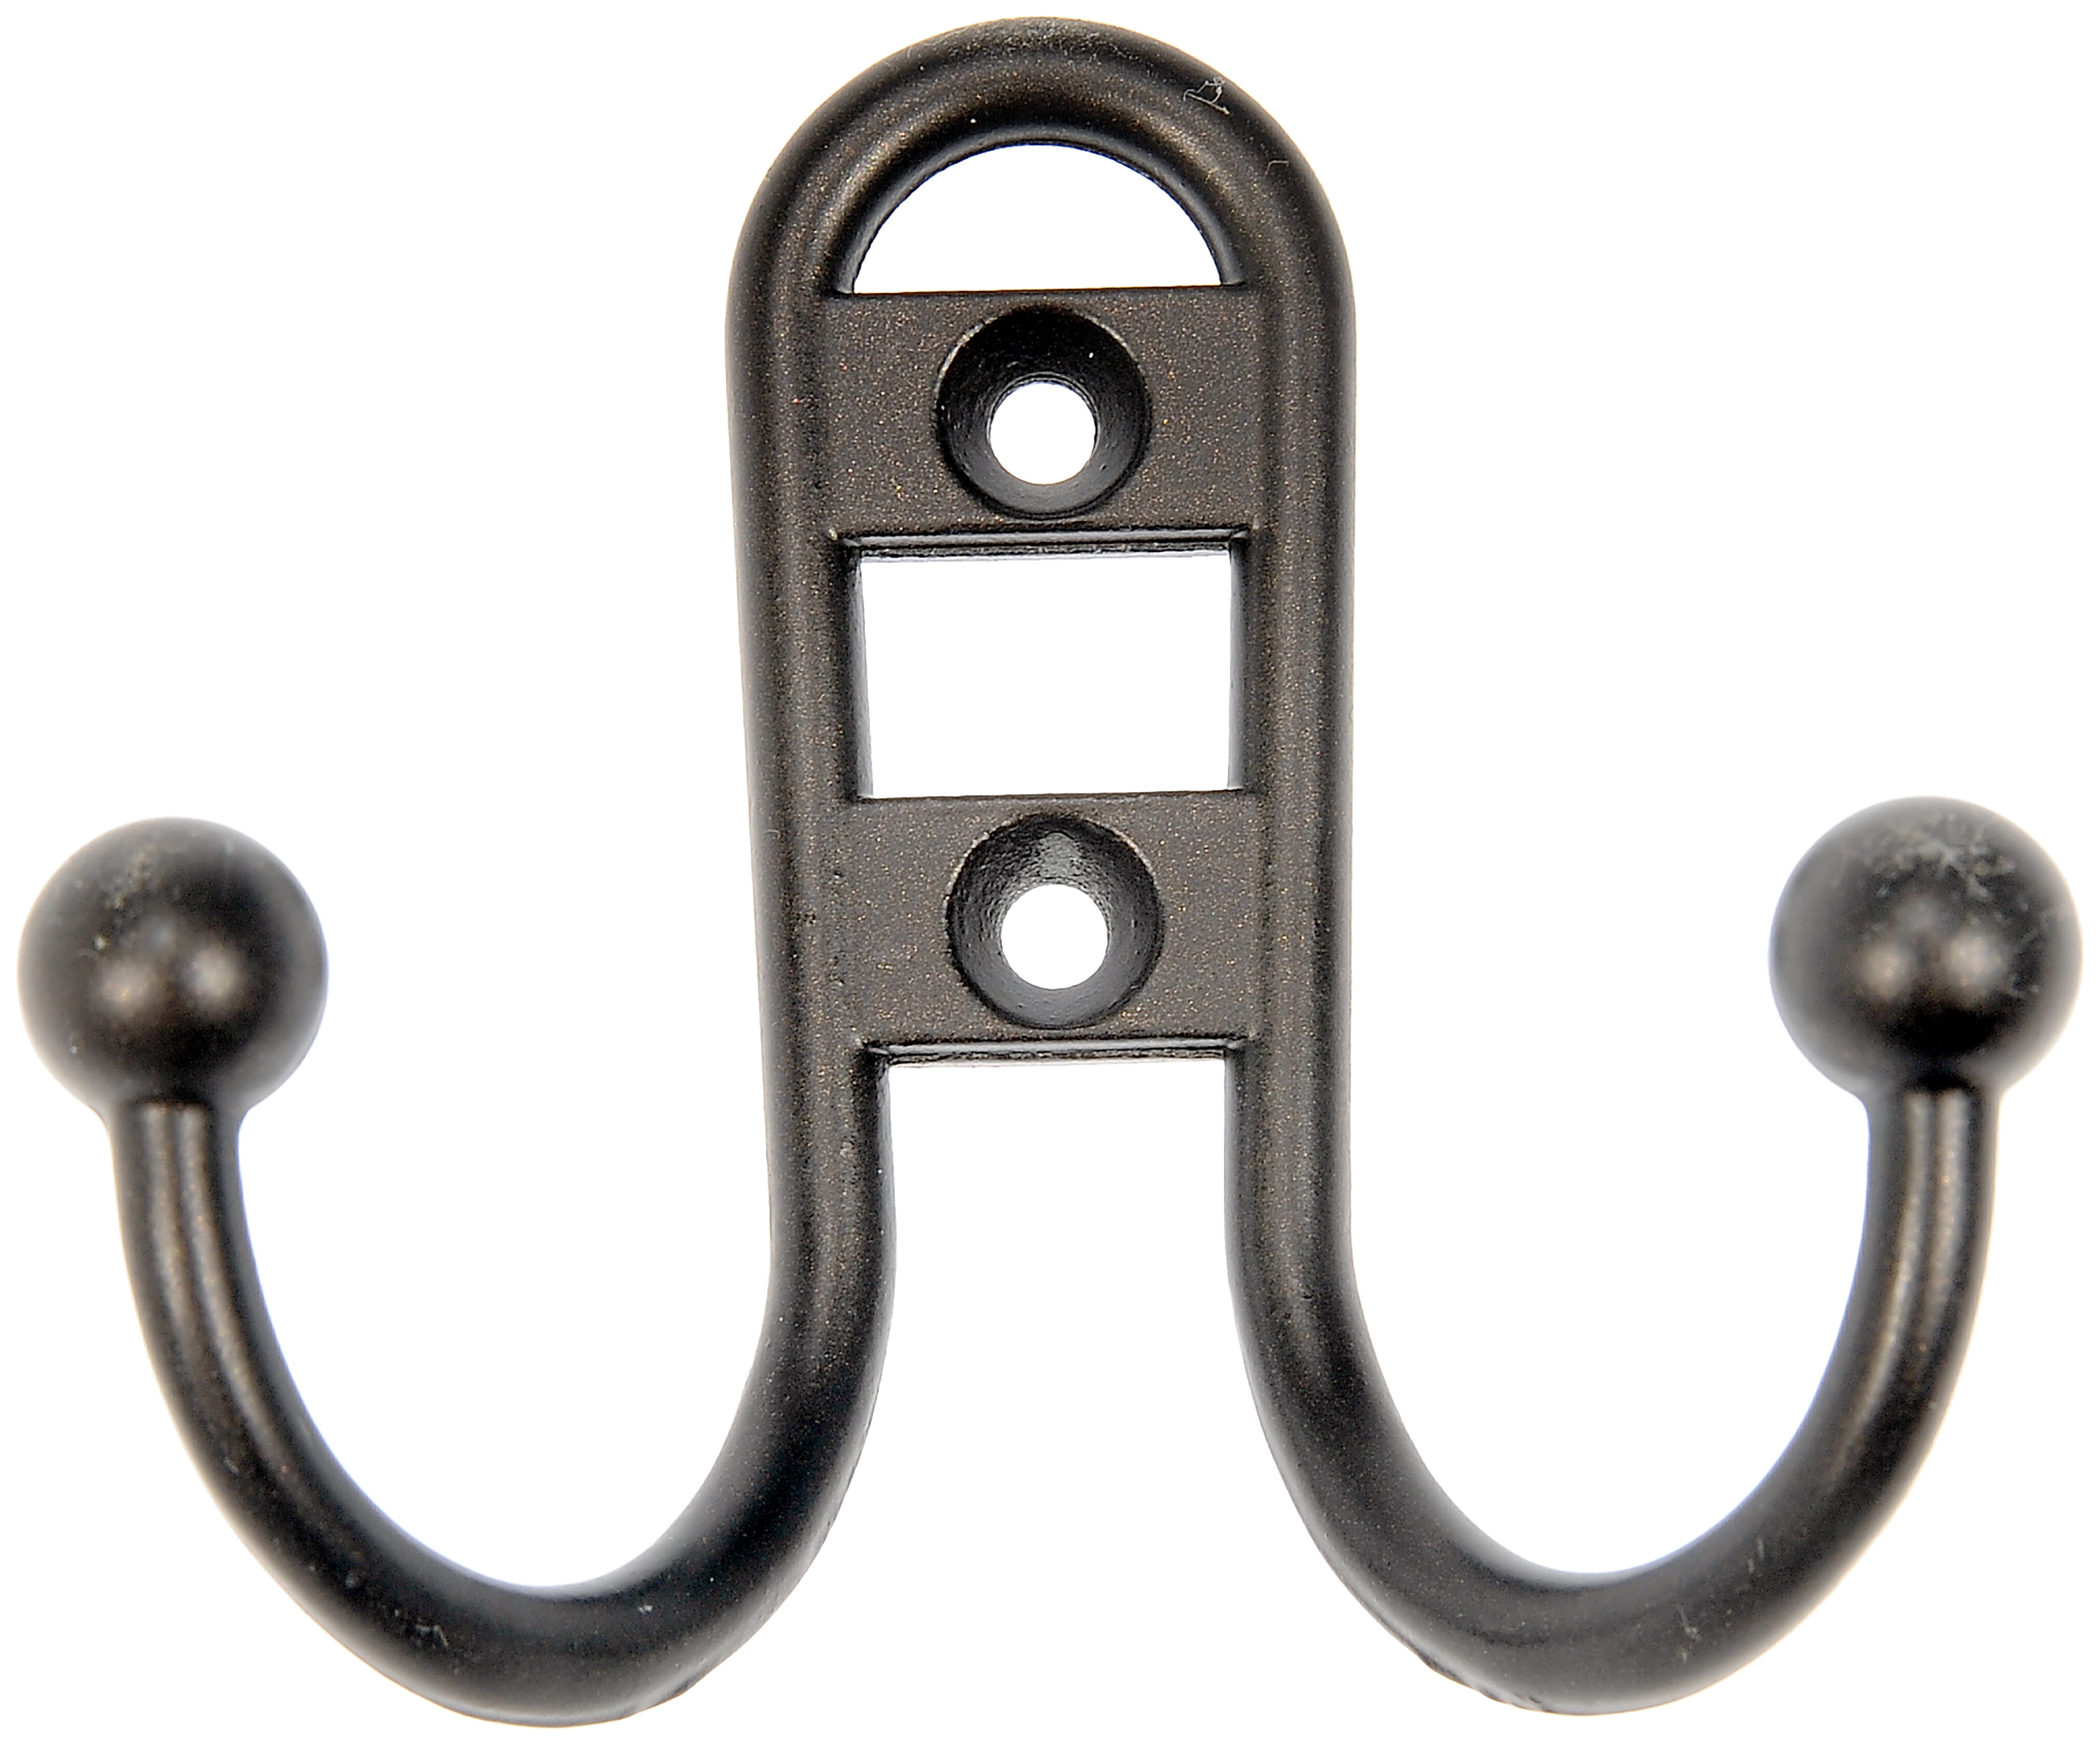 Mainstays Durable Plastic Adhesive Hook with Bronze Finish, 6 Count 